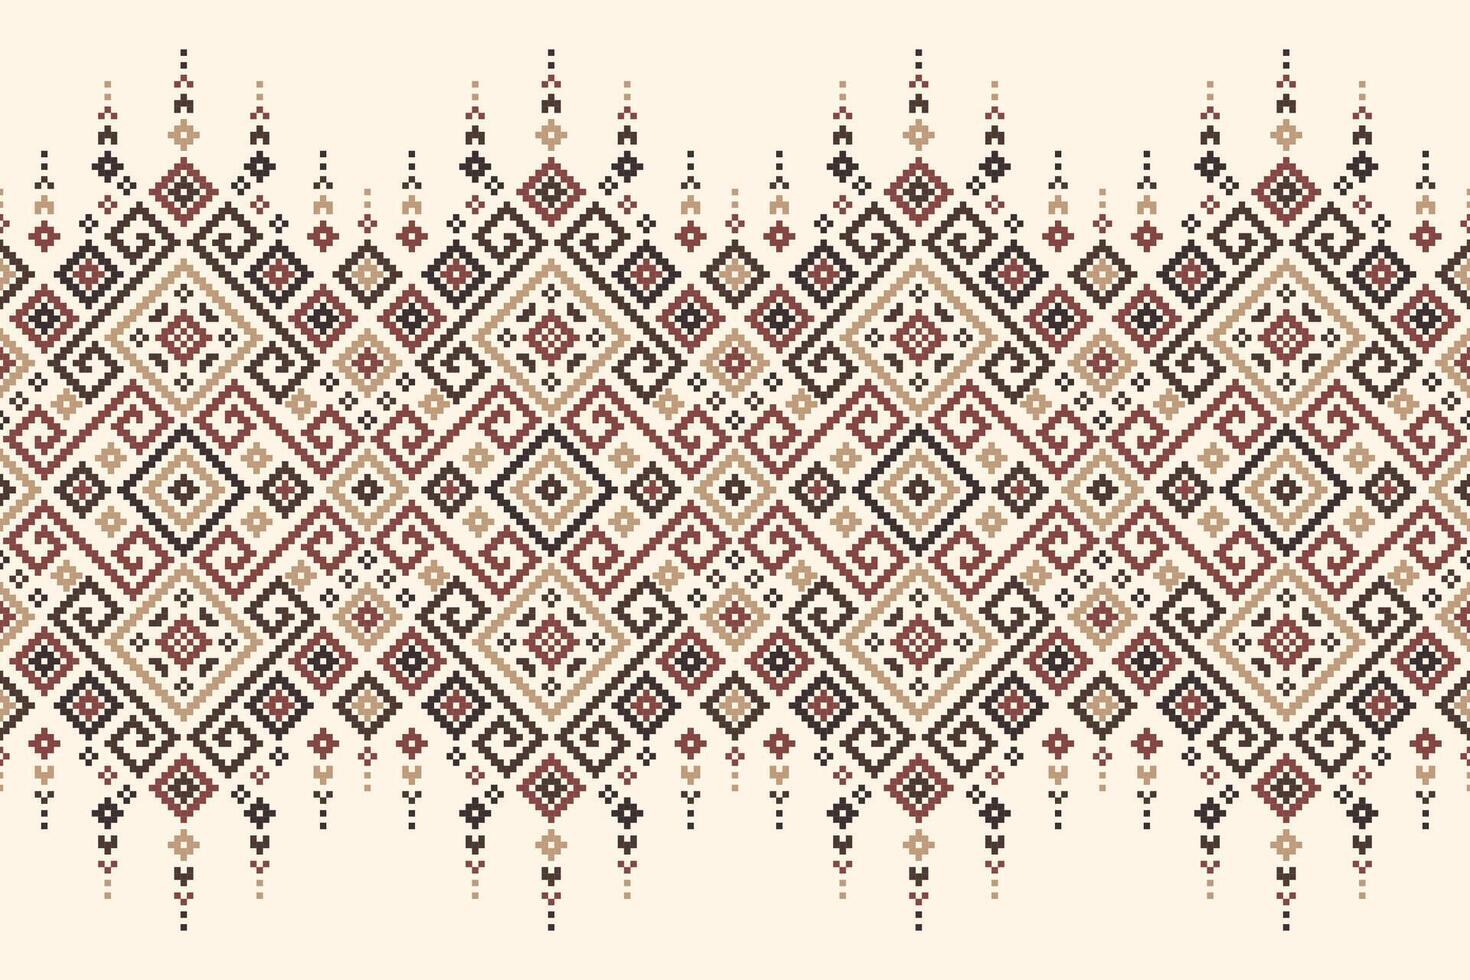 Fabric pattern features a geometric design with squares, triangles, and circles,seamless pattern, background. vector